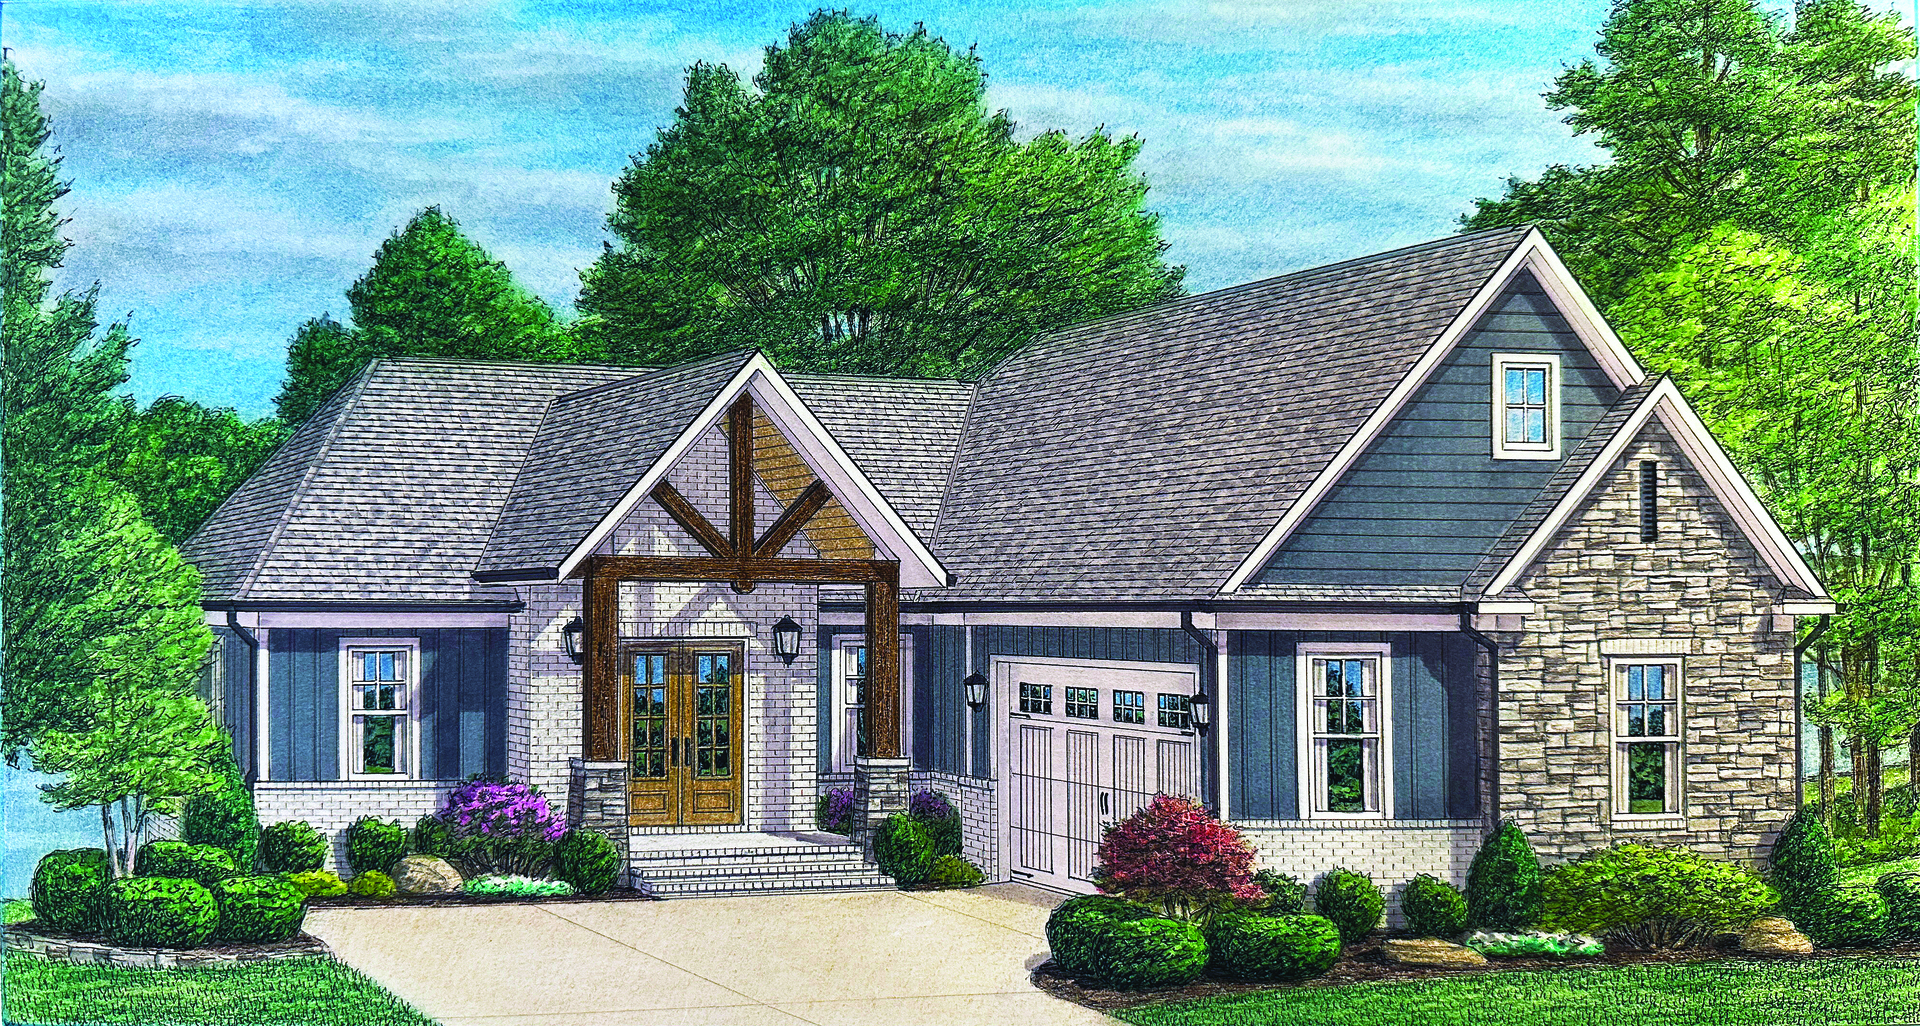 The Haven Front Elevation Rendering